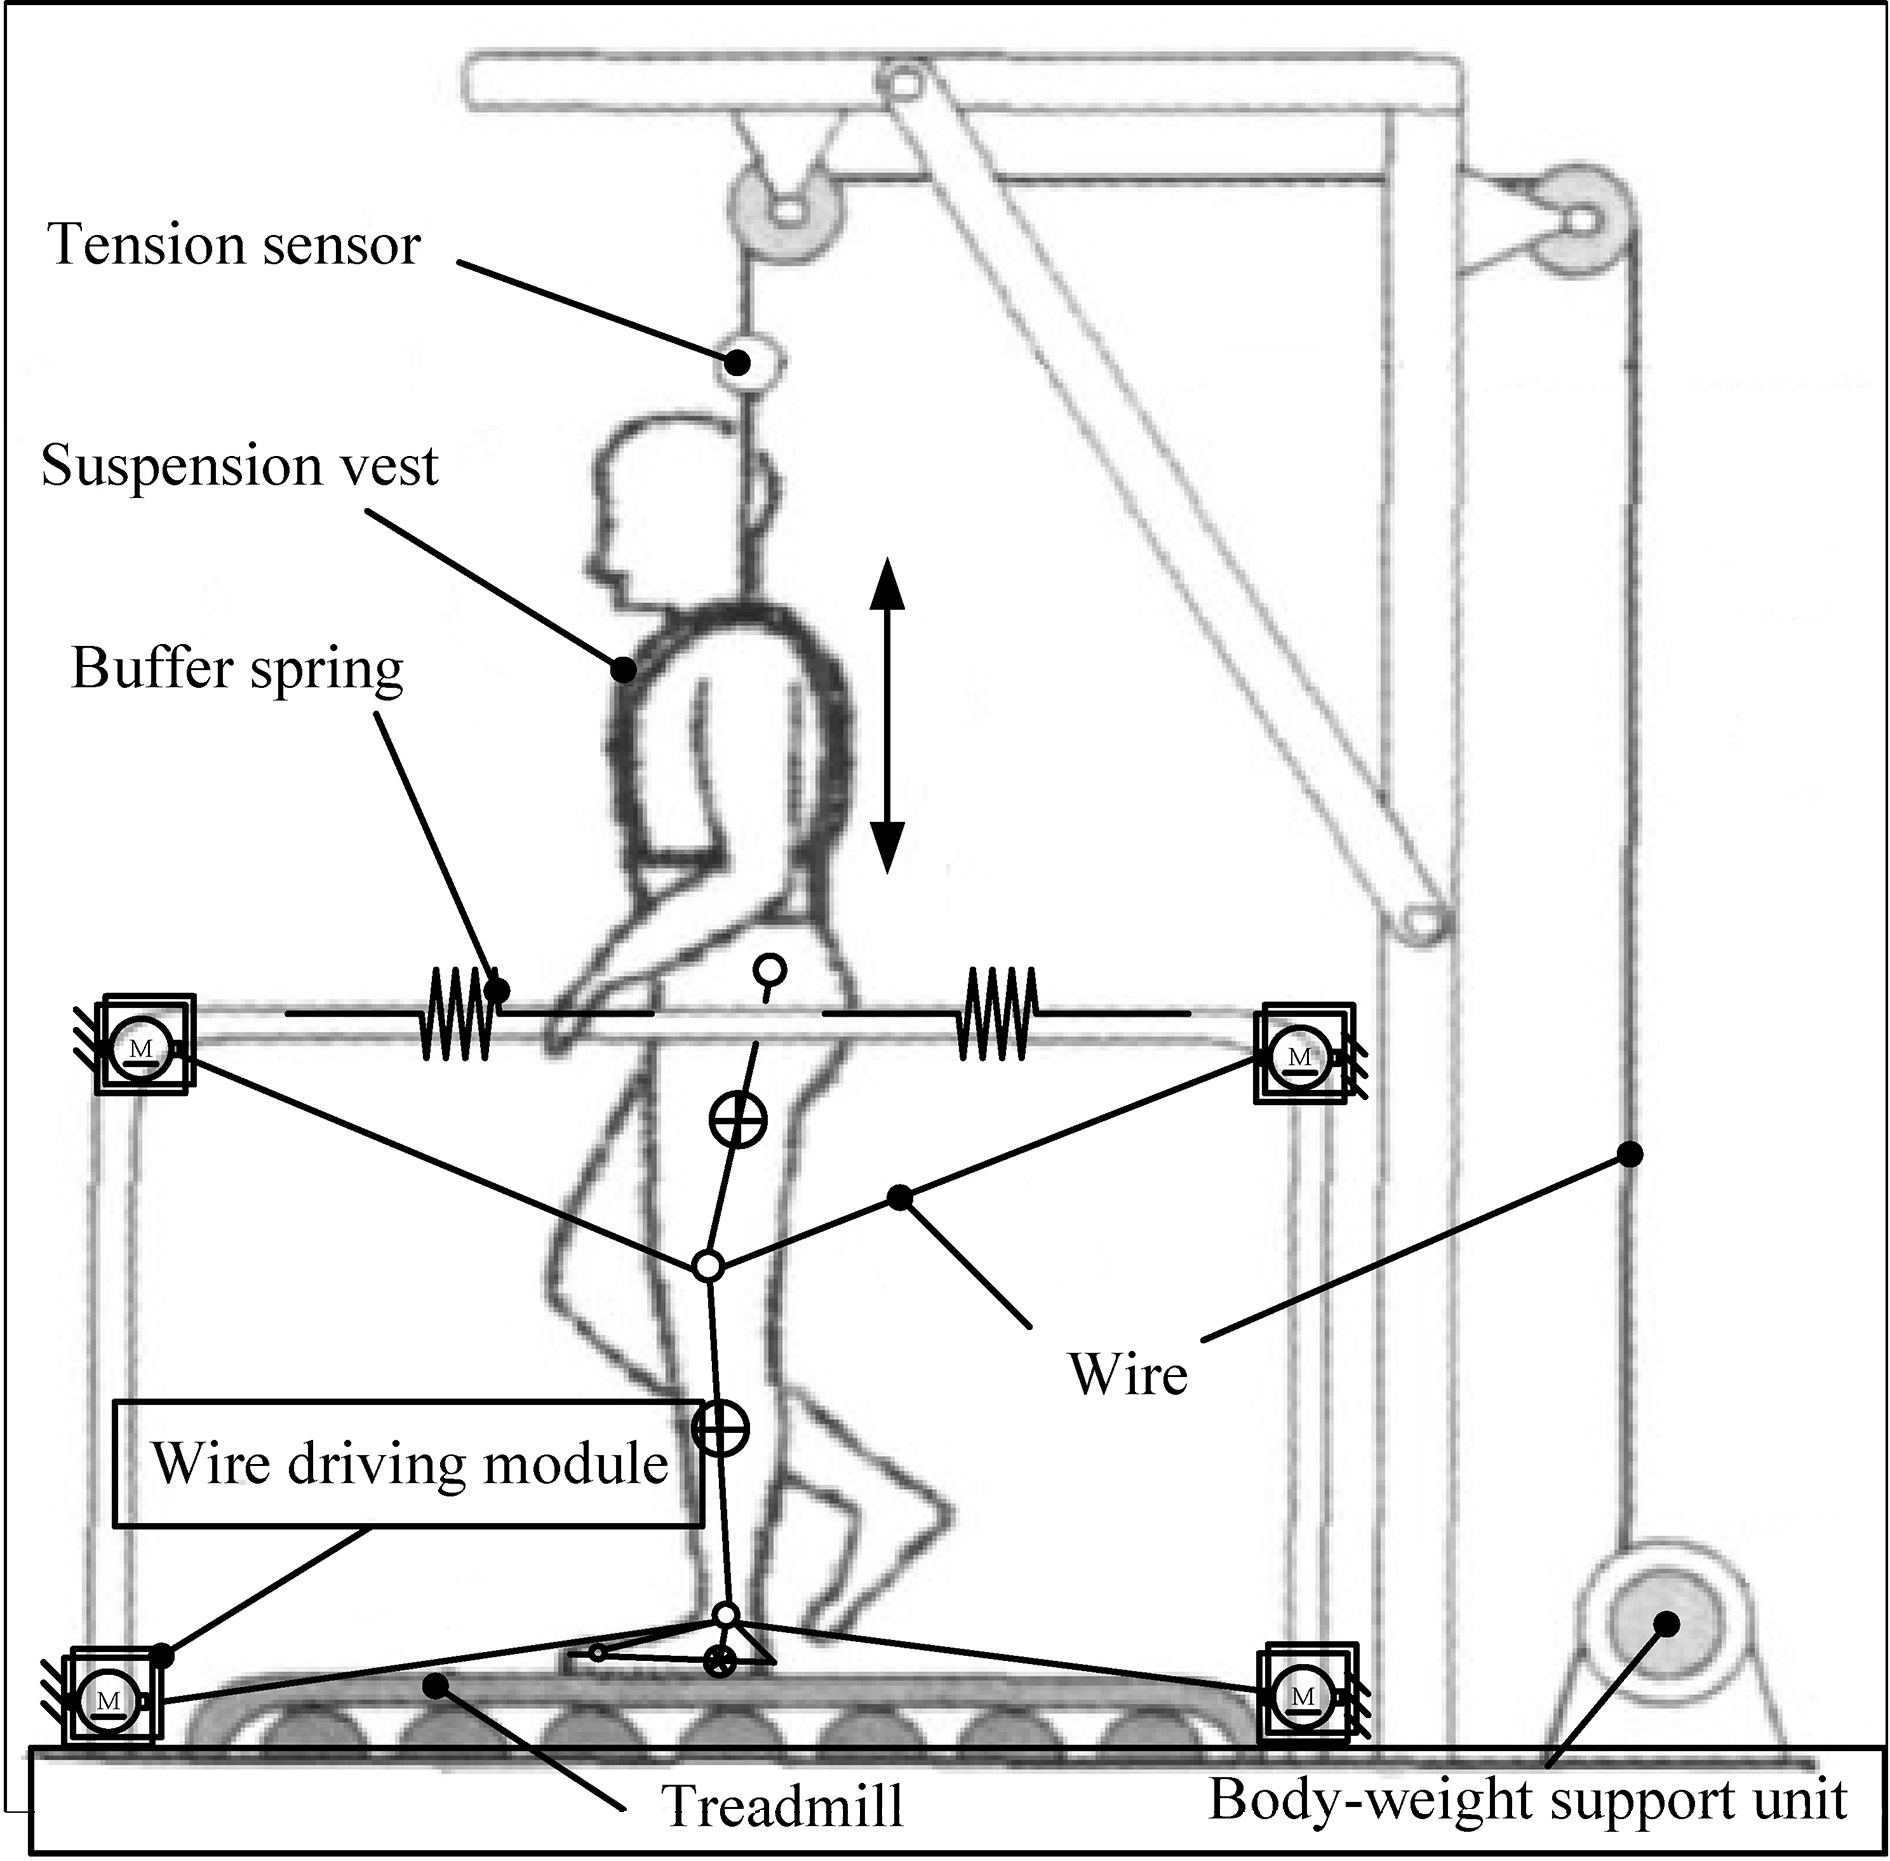 Structural scheme of the wire driving lower limb rehabilitation robot.